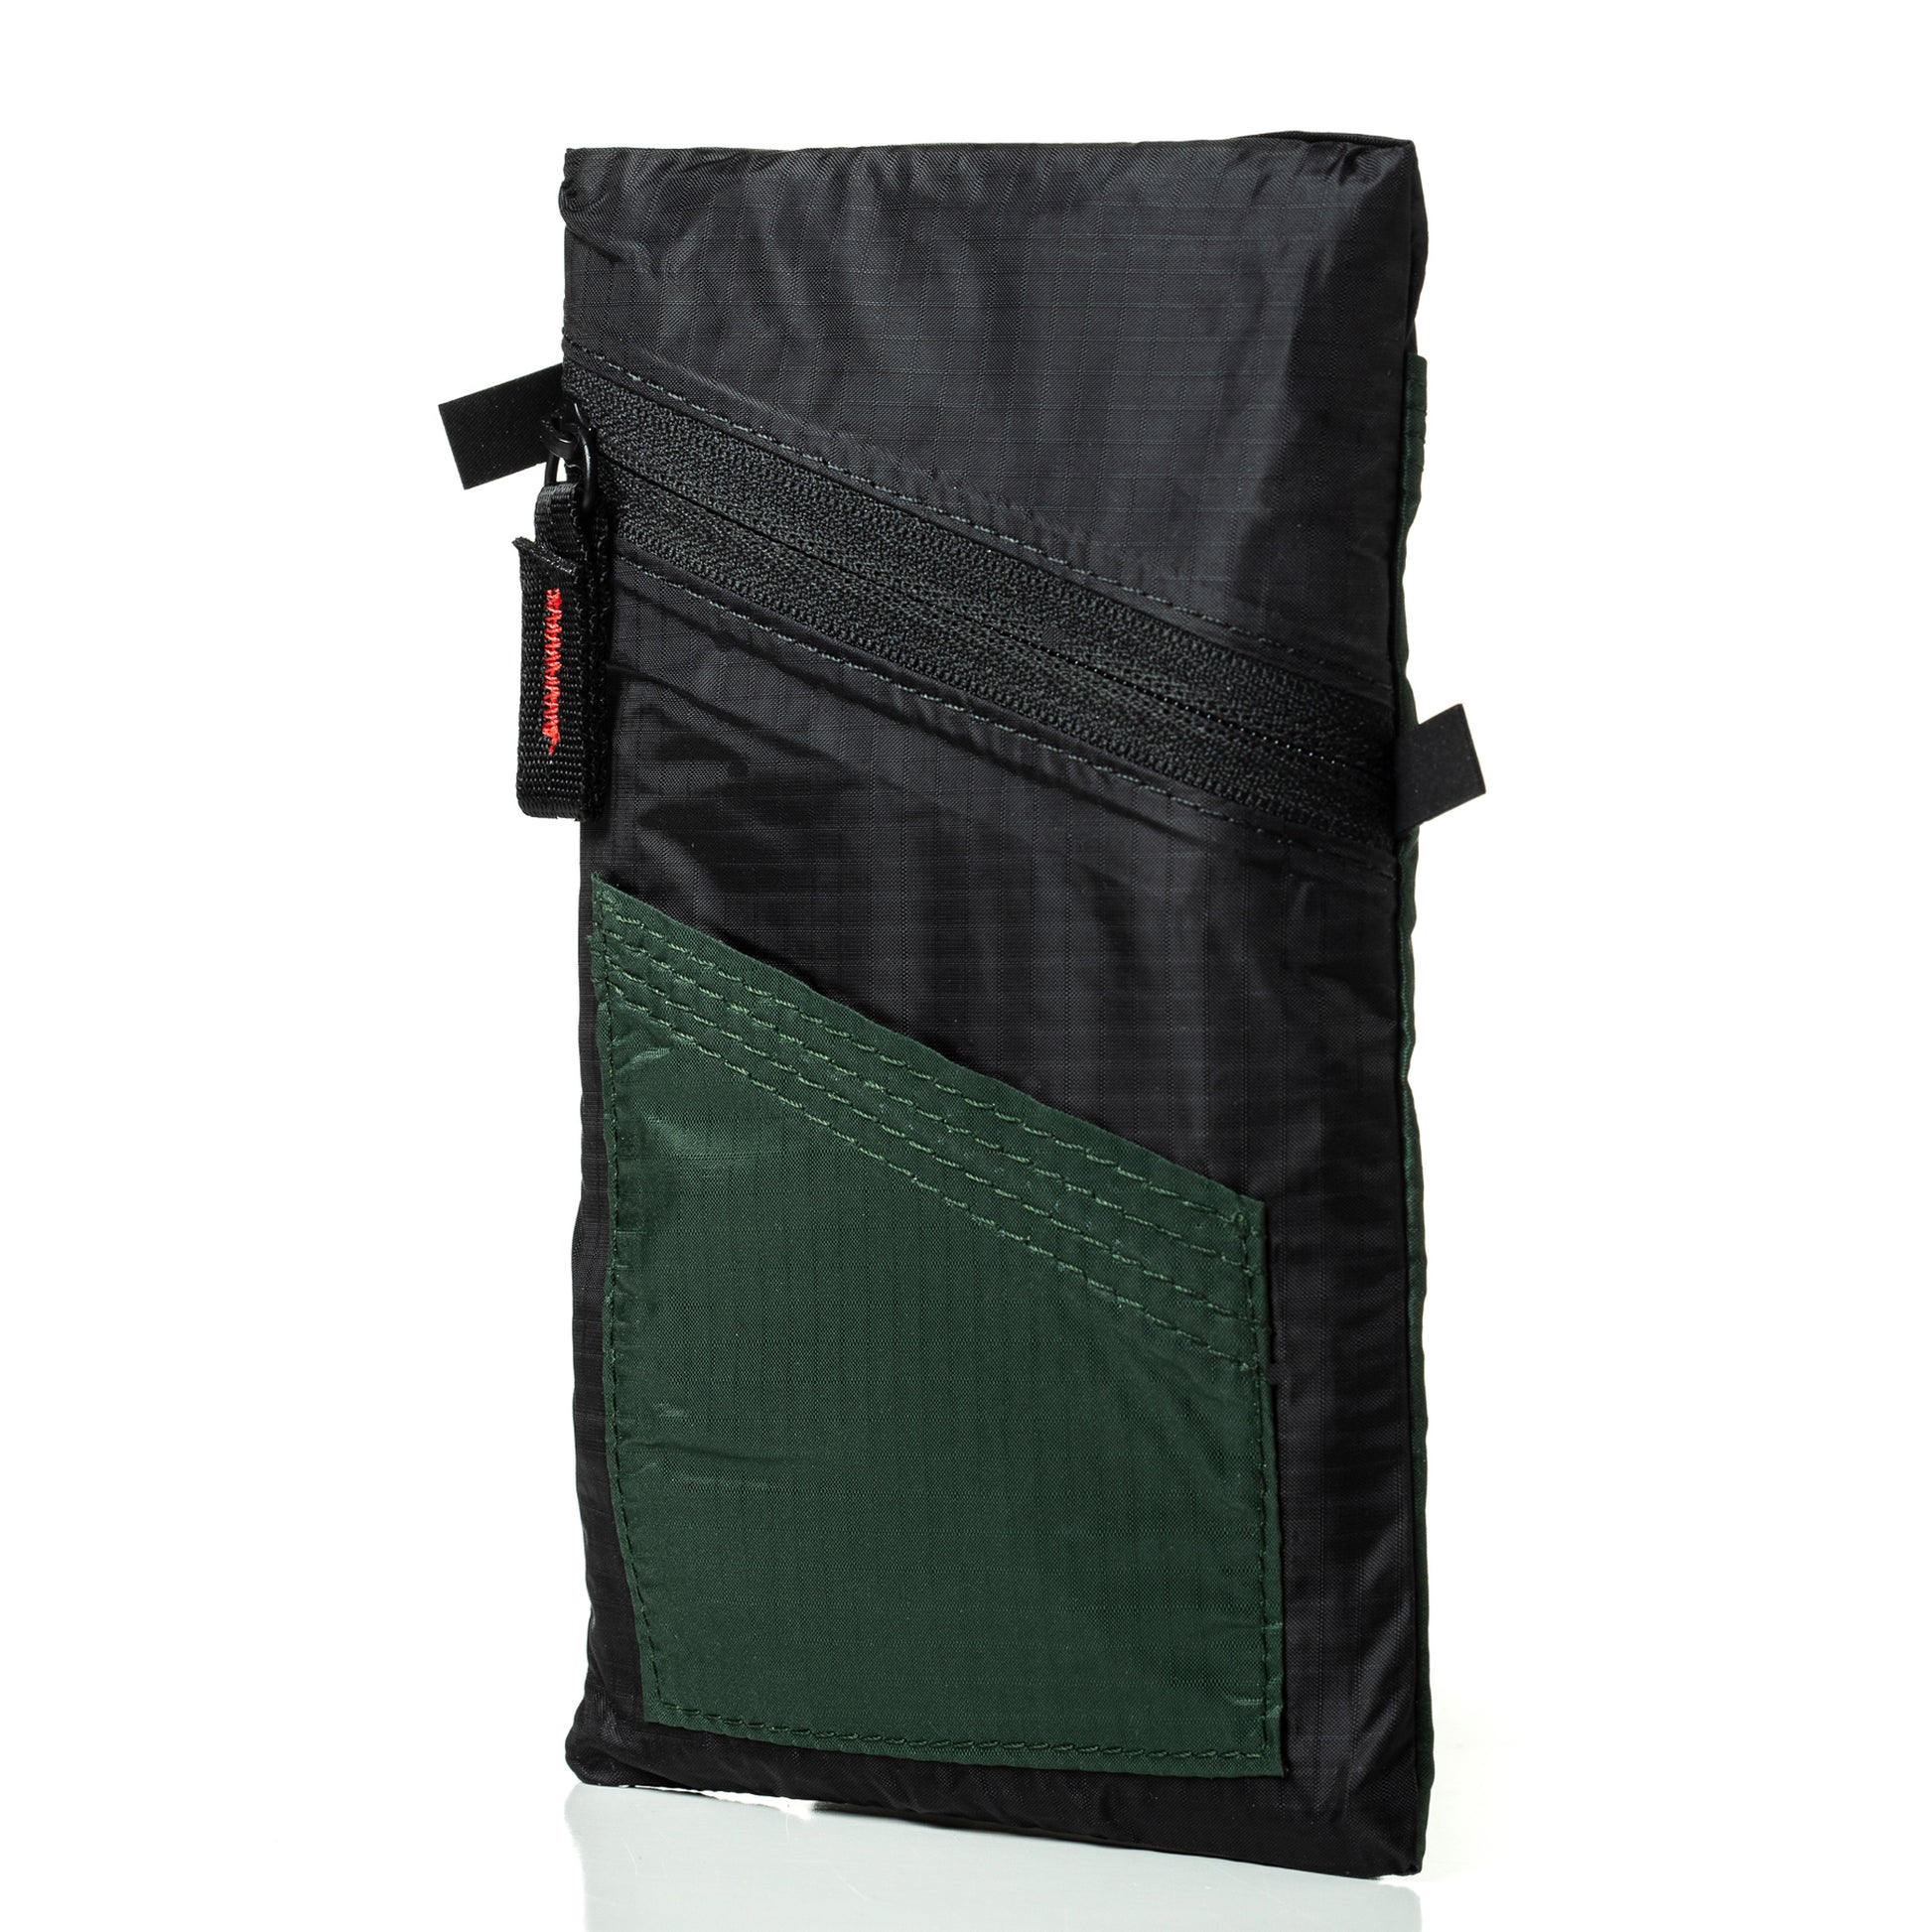 Front view of Fierce Hazel Echelon Ultralightweight weatherproof seam-sealed cycling pouch sustainable zipper phone pouch 30D PU + silicon-coated nylon